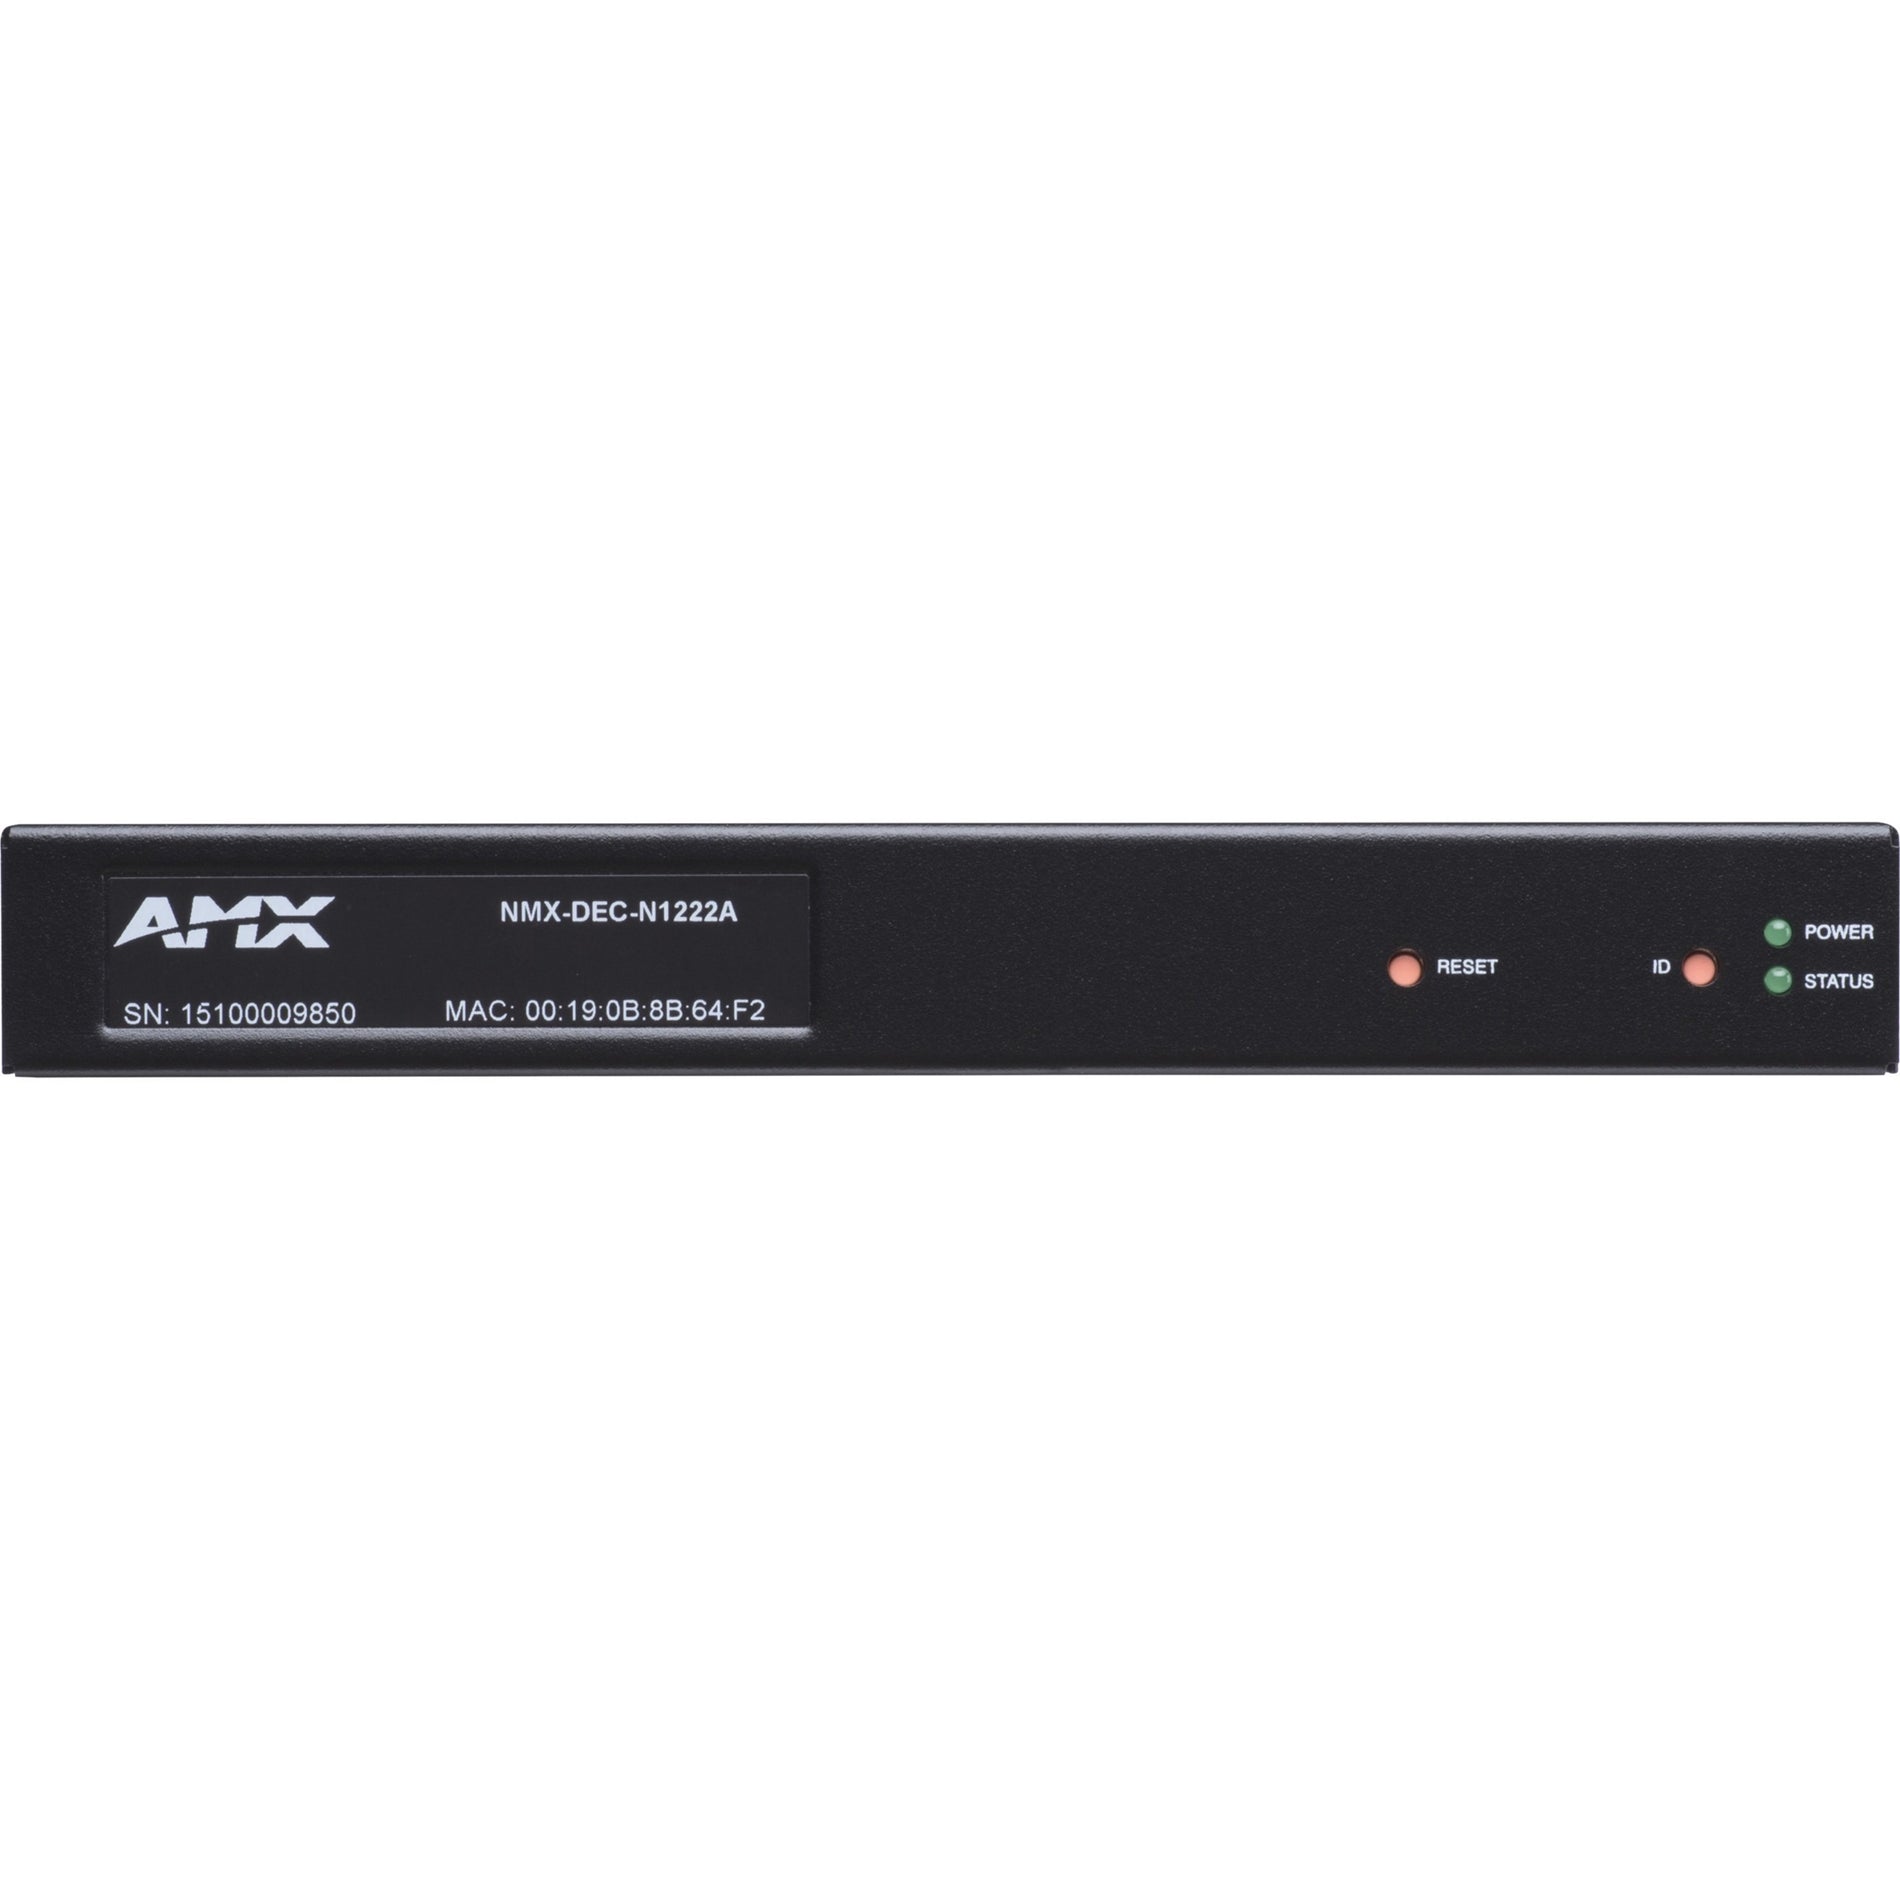 AMX FGN1222A-SA NMX-DEC-N1222A Minimal Proprietary Compression Video Over IP Decoder with PoE, AES67 Support